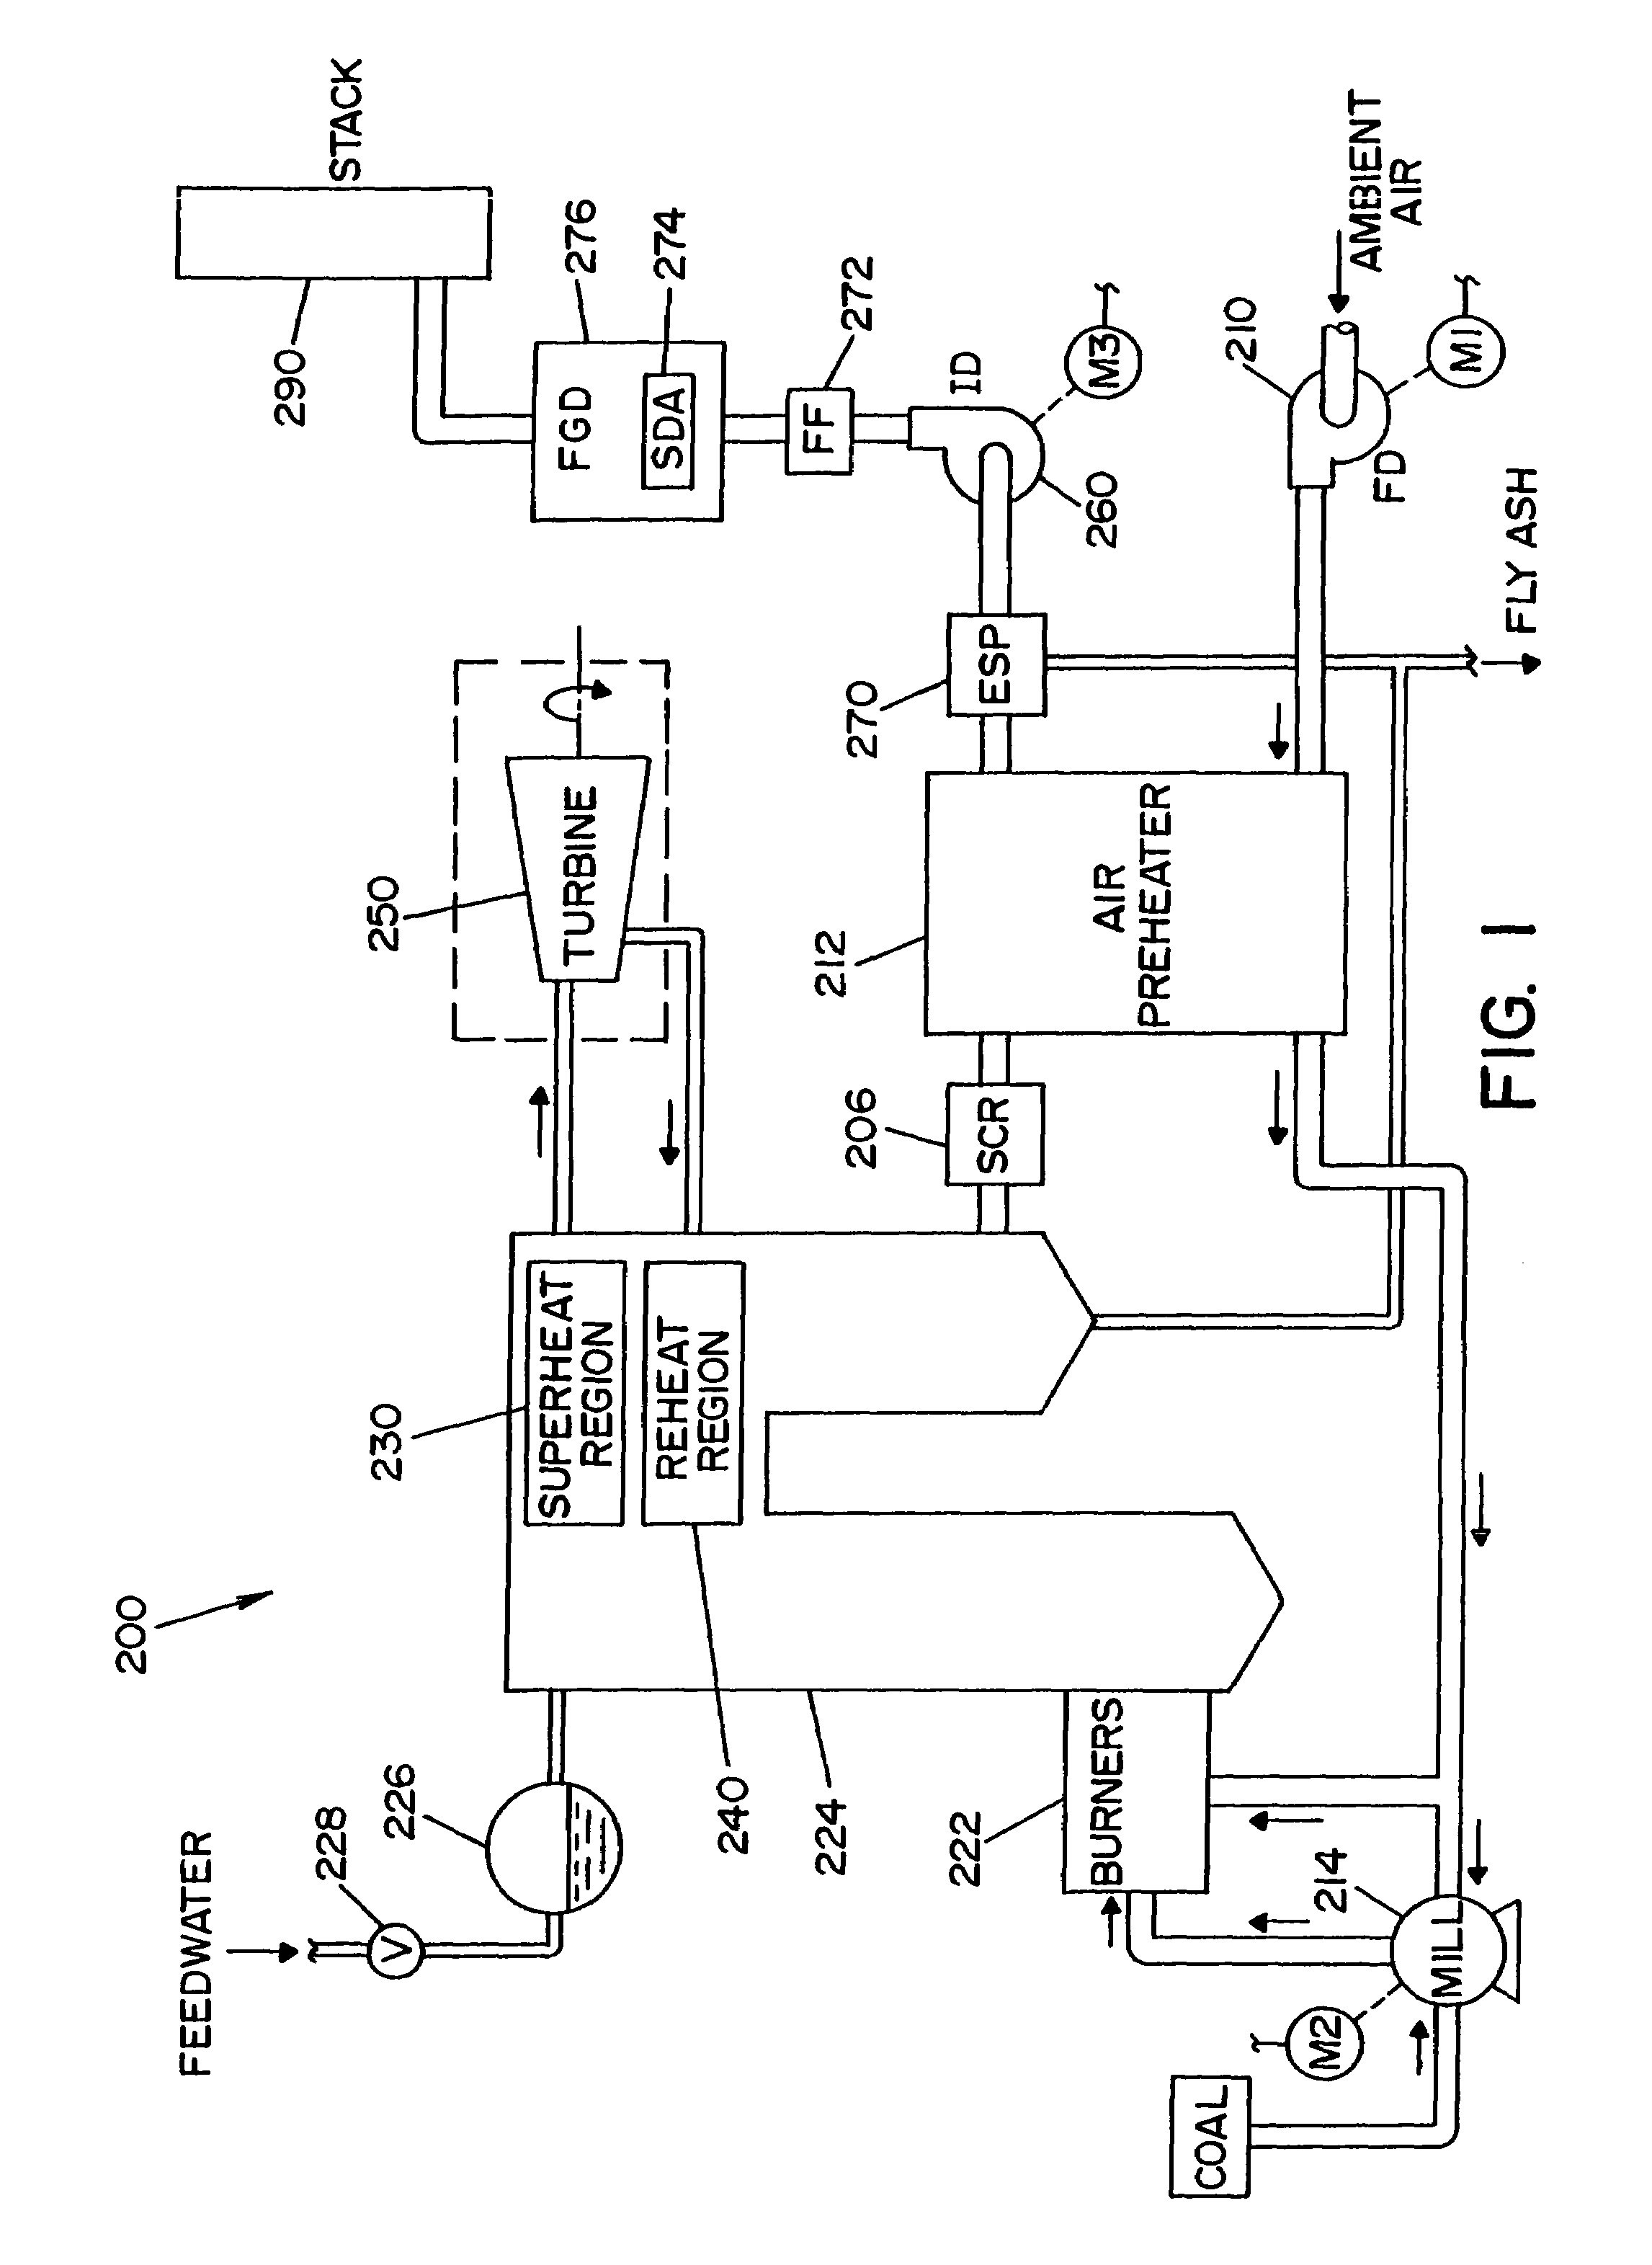 Model based sequential optimization of a single or multiple power generating units